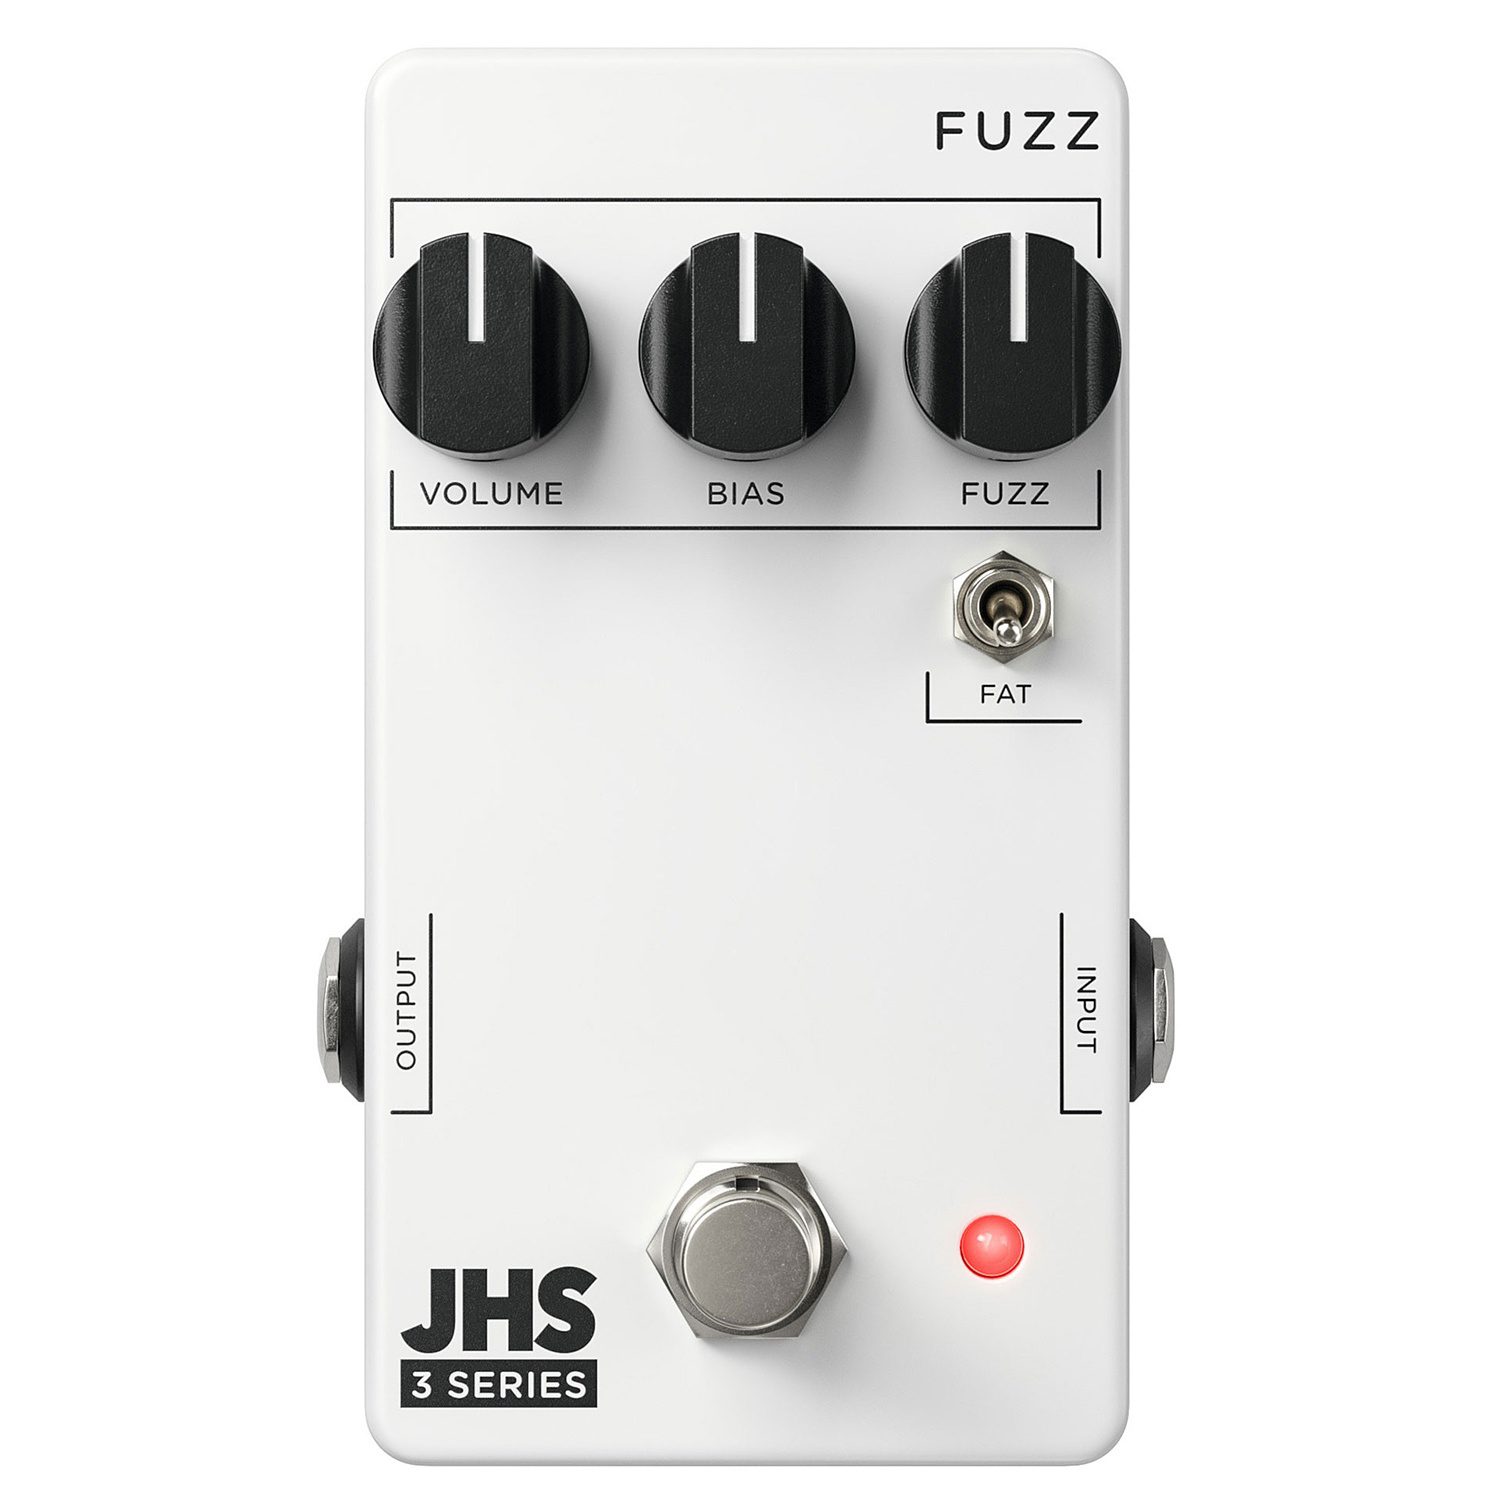 jhs pedals 3 series fuzz | GIAMPAOLO NOTO